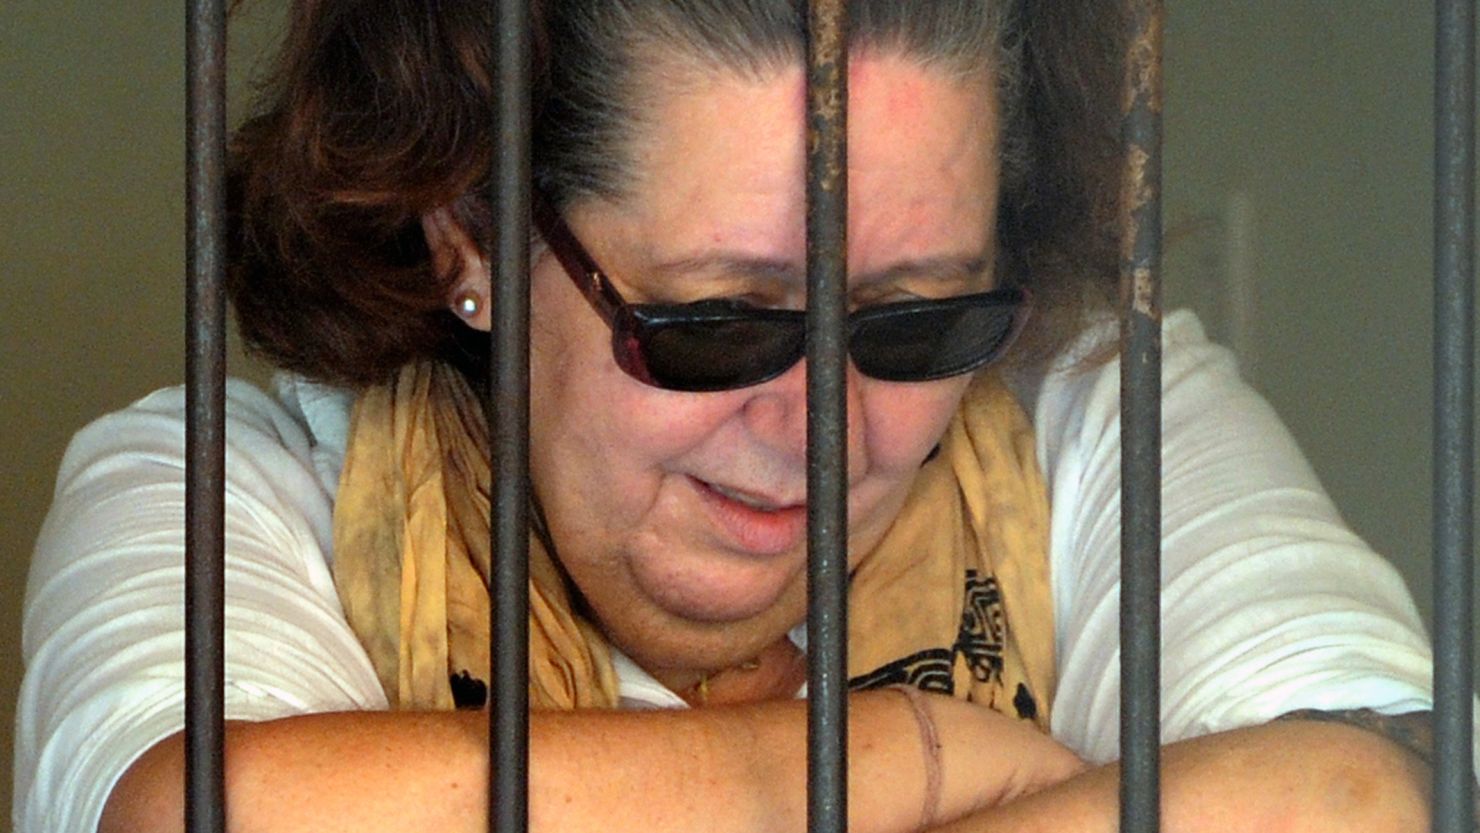 Prosecutors said Lindsay Sandiford was found to have blocks of cocaine in her suitcase when she arrived in Bali in 2012.